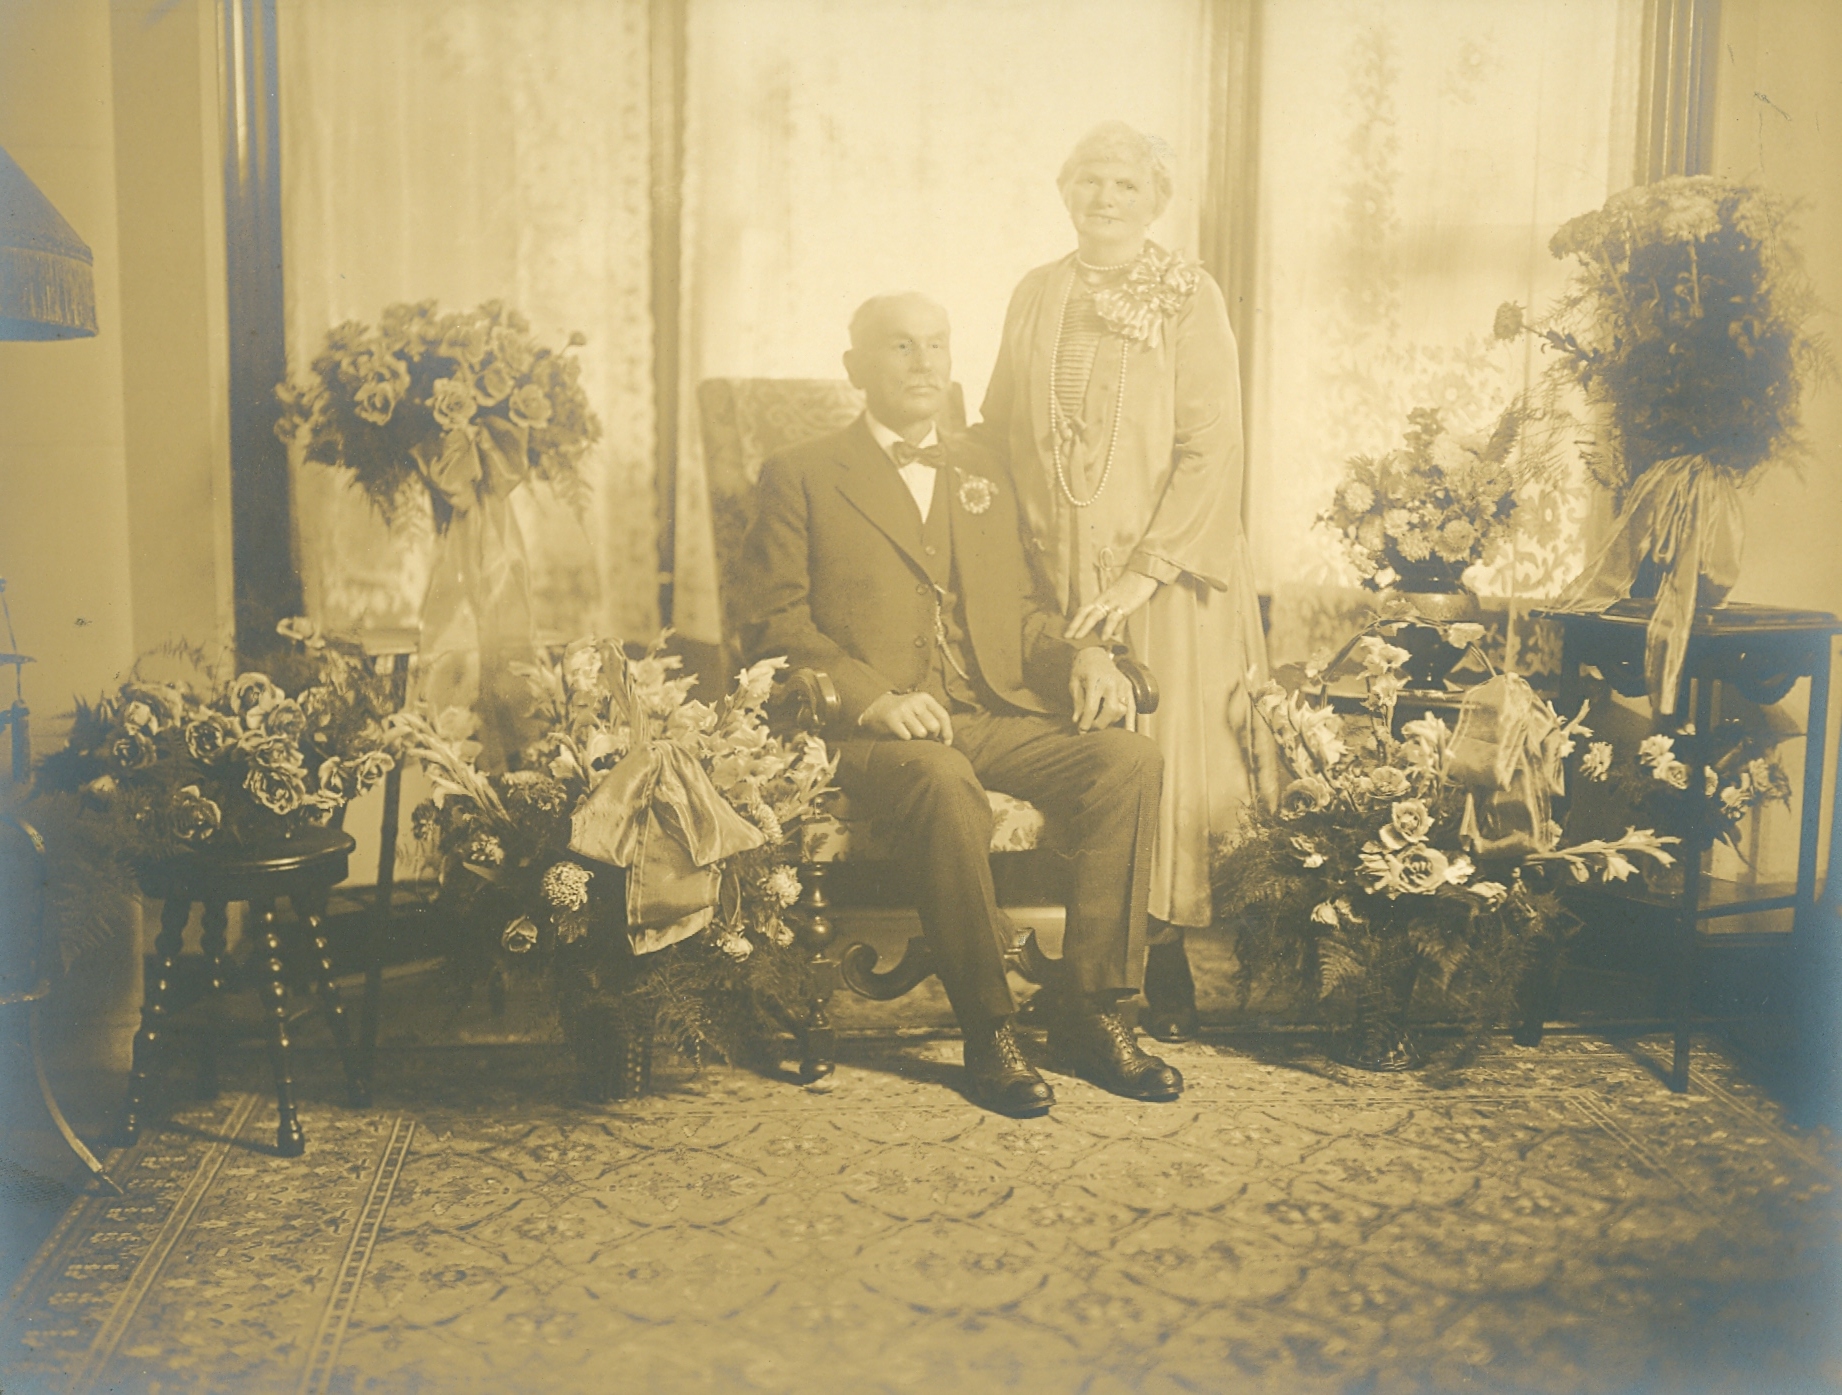 Philip Beckerle (b.1854-1939) with his spouse 
 Pauline Miller Beckerle (b.18??-1933)
 Pearl River New York 1927